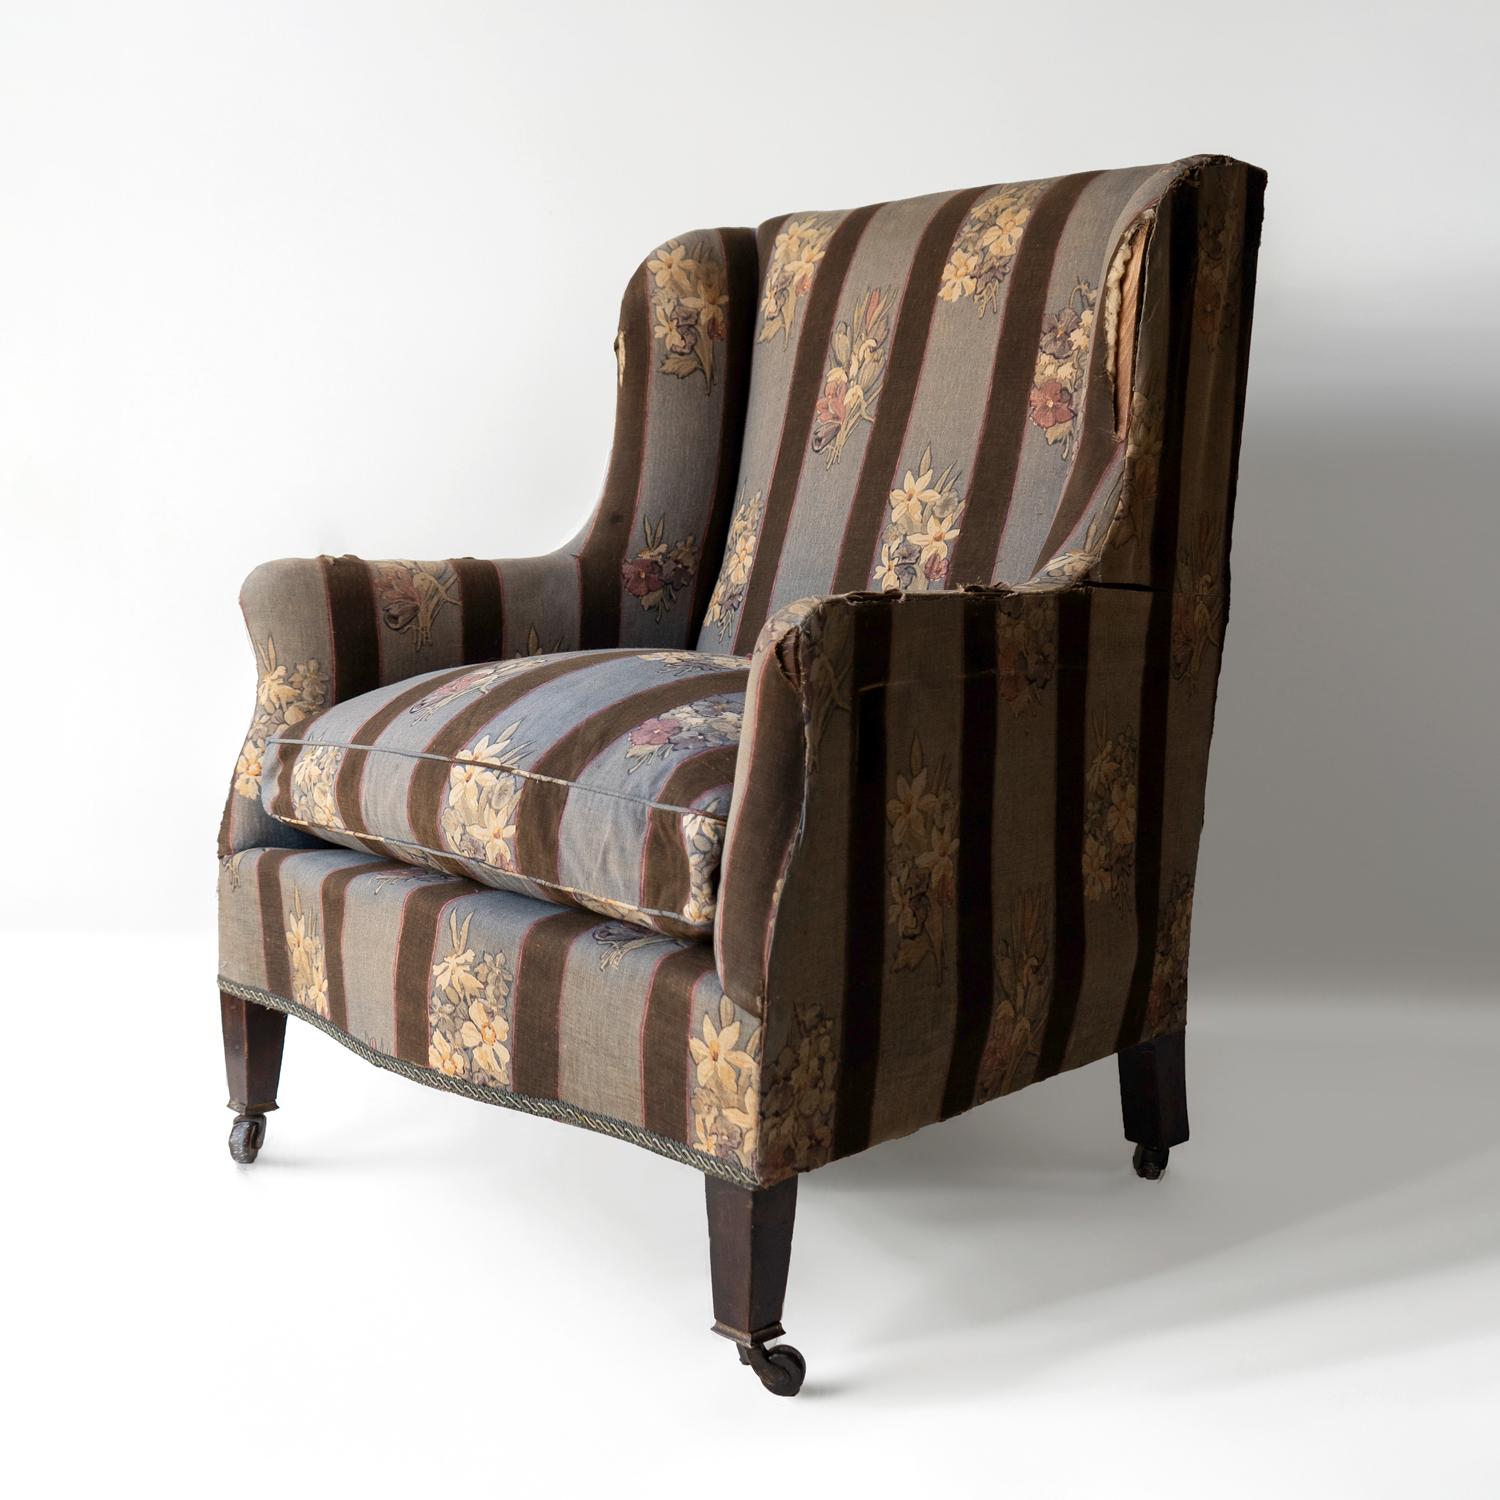 Hand-Crafted Antique Edwardian Country House Upholstered Armchair, Early 20th Century